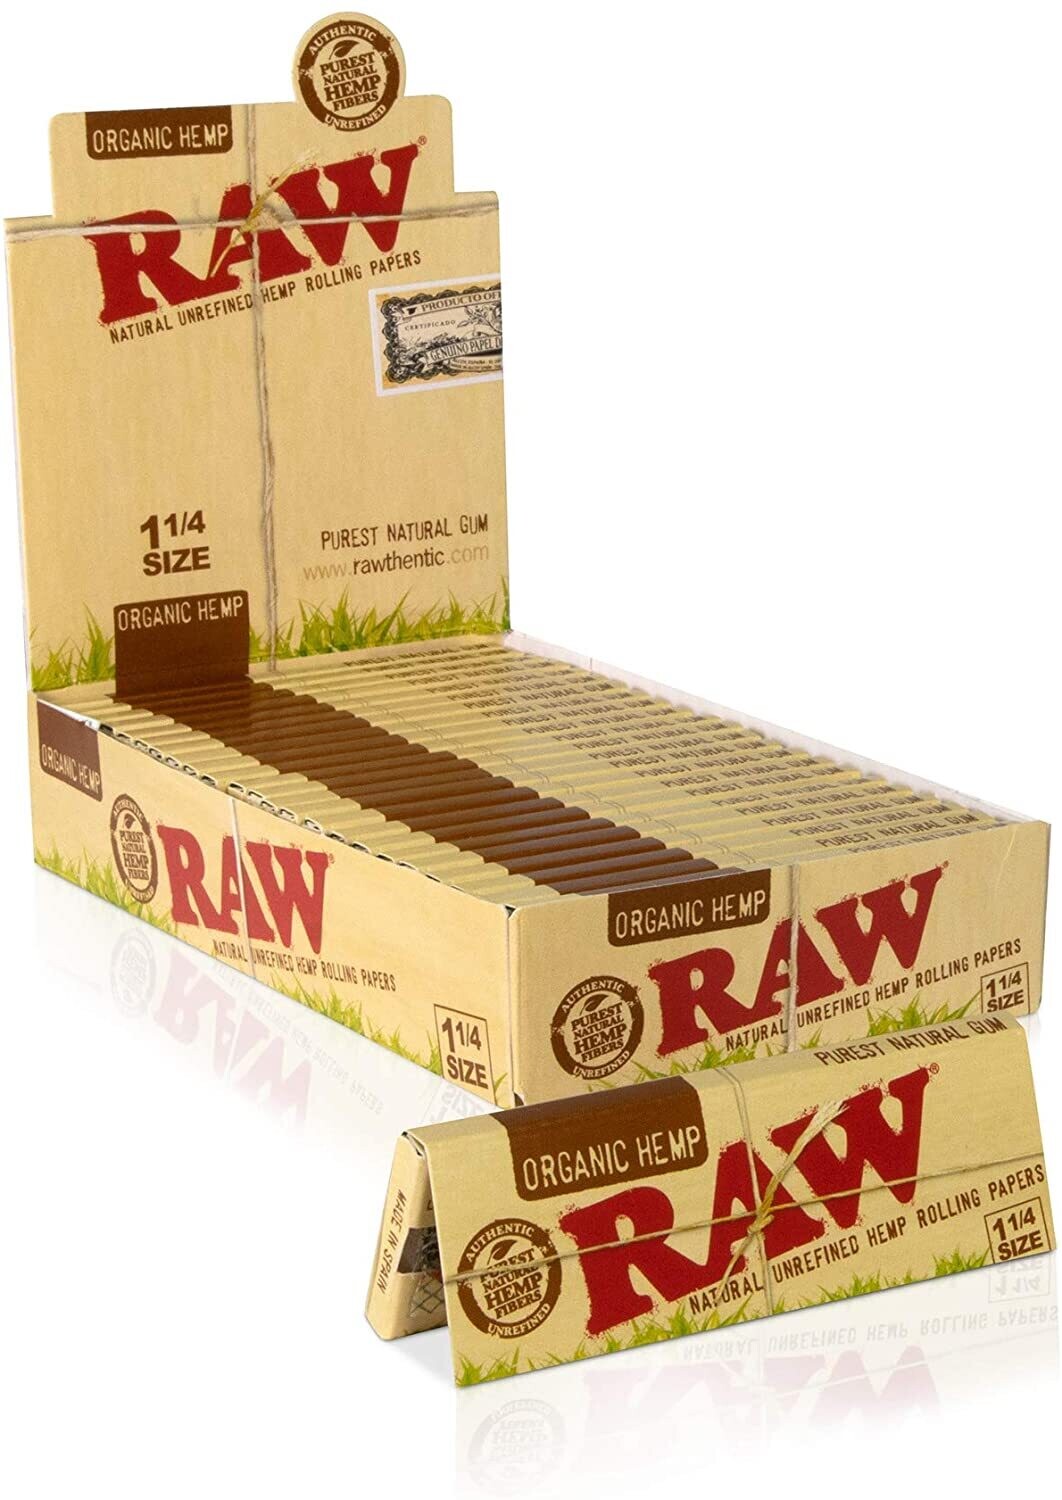 Raw Natural Unrefined CLASSIC Papers 1 1/4 Size